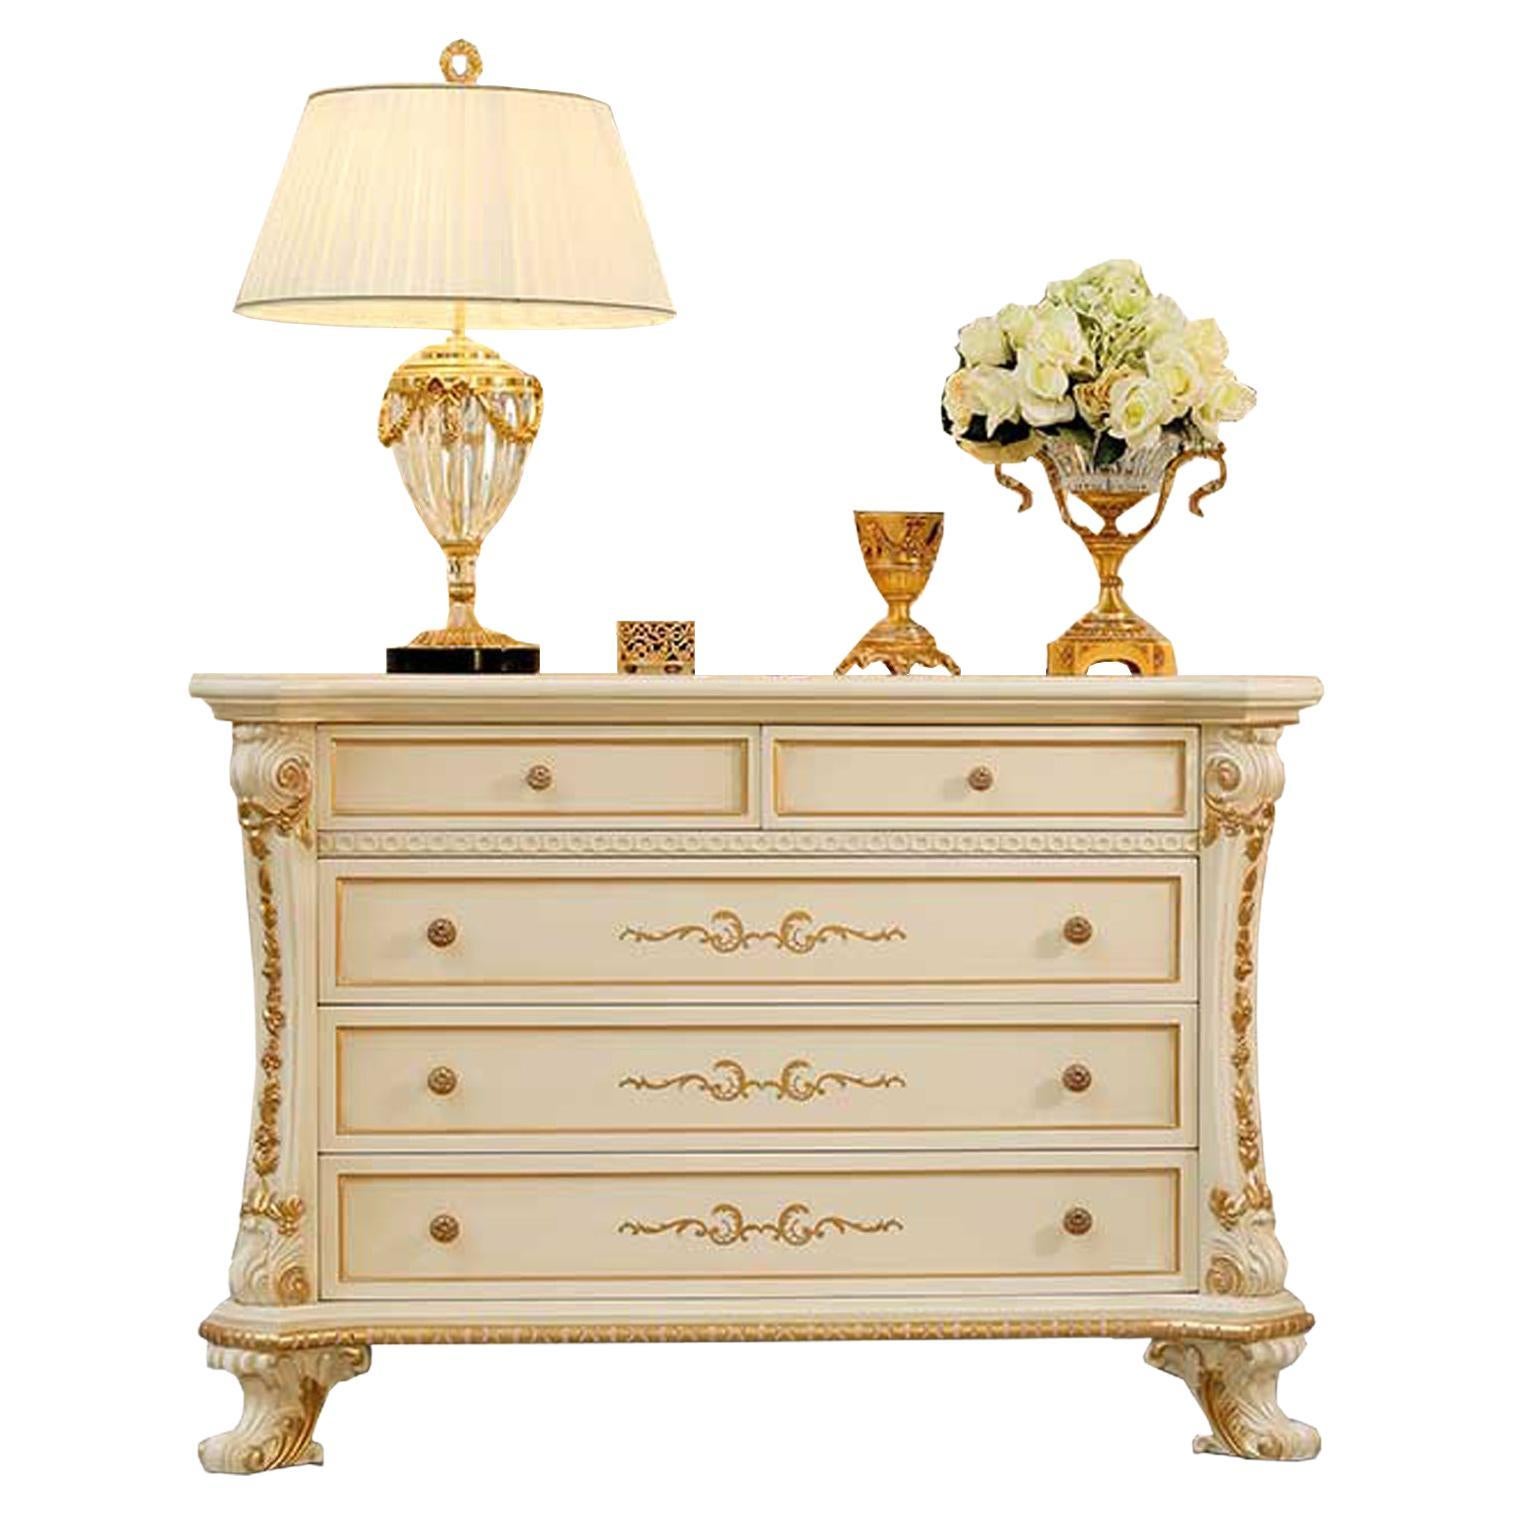 21st Century Rococo 5-Drawers Chest in Ivory Finish by Modenese Gastone Interior For Sale